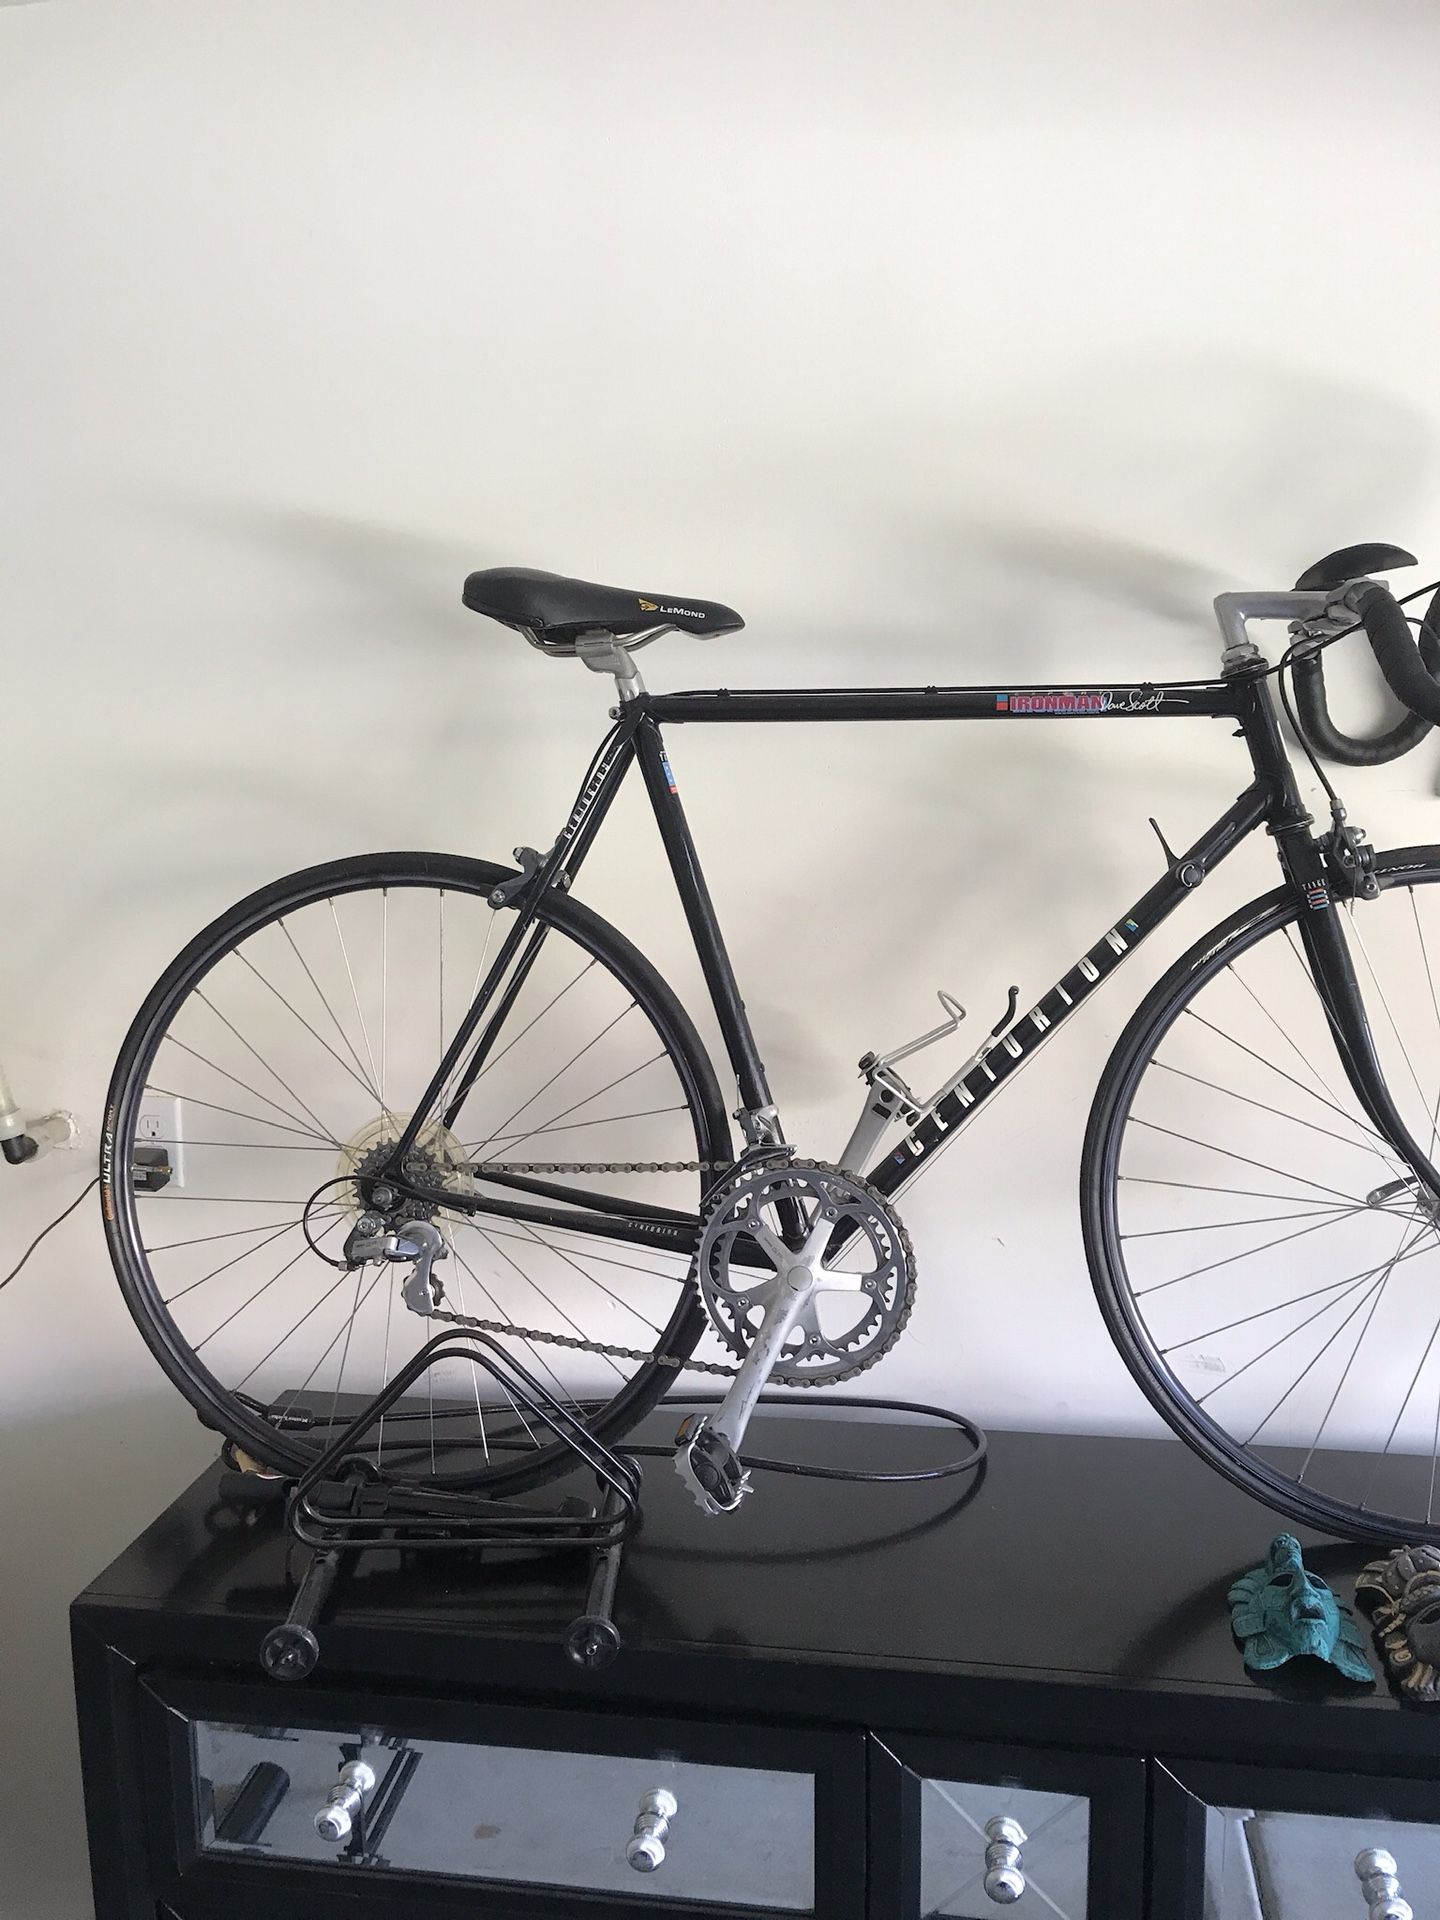 Collector Dave Scott Road Bike - Works perfectly